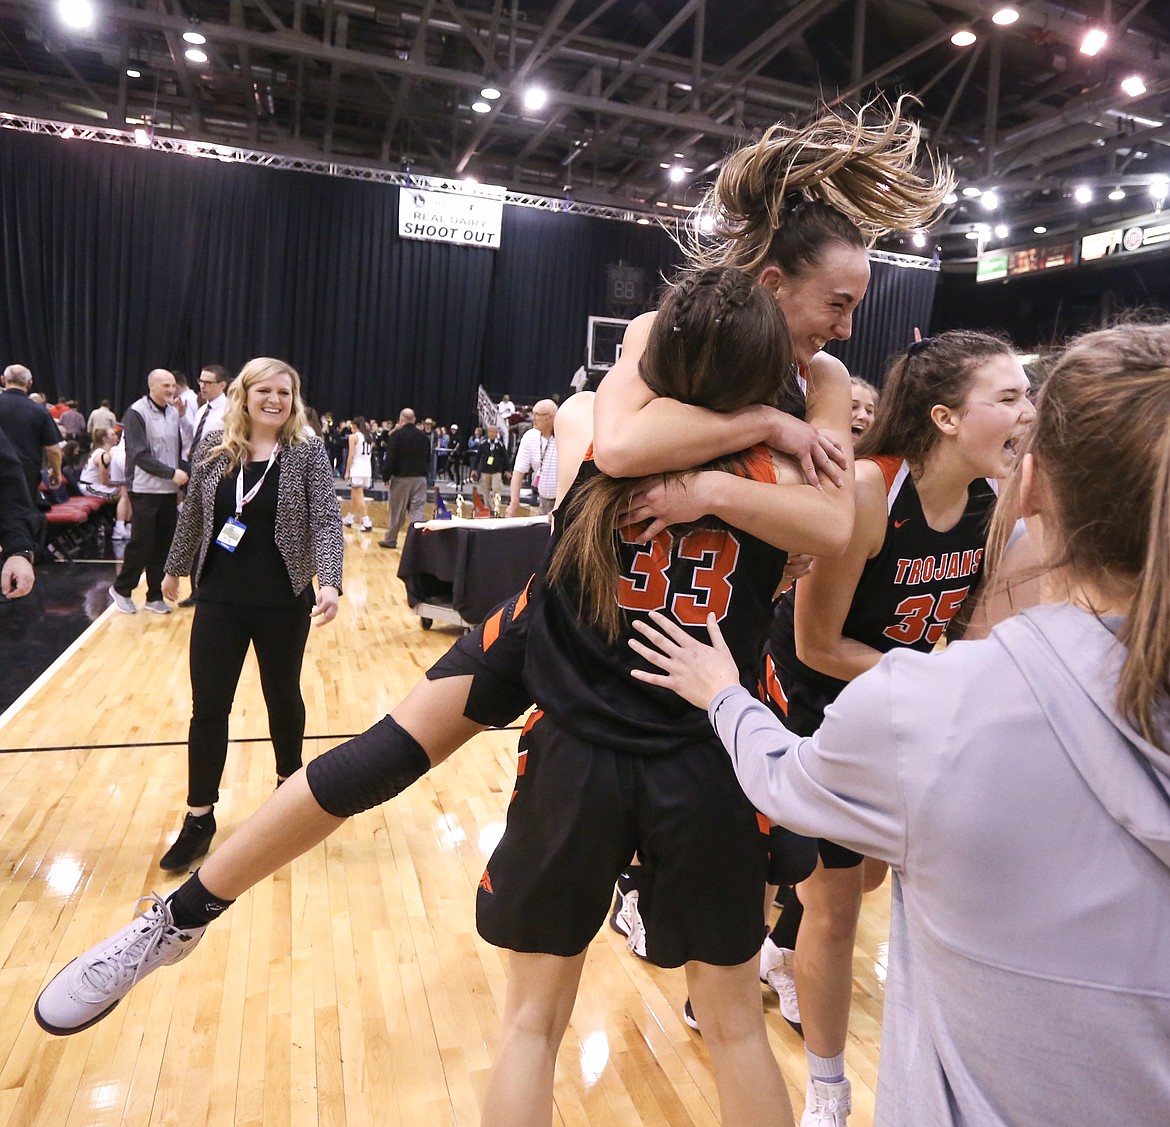 JASON DUCHOW PHOTOGRAPHY
Bayley Brennan leaps into the arms of Melody Kempton after Post Falls won the state 5A girls basketball title Saturday night at the Ford Idaho Center in Nampa.